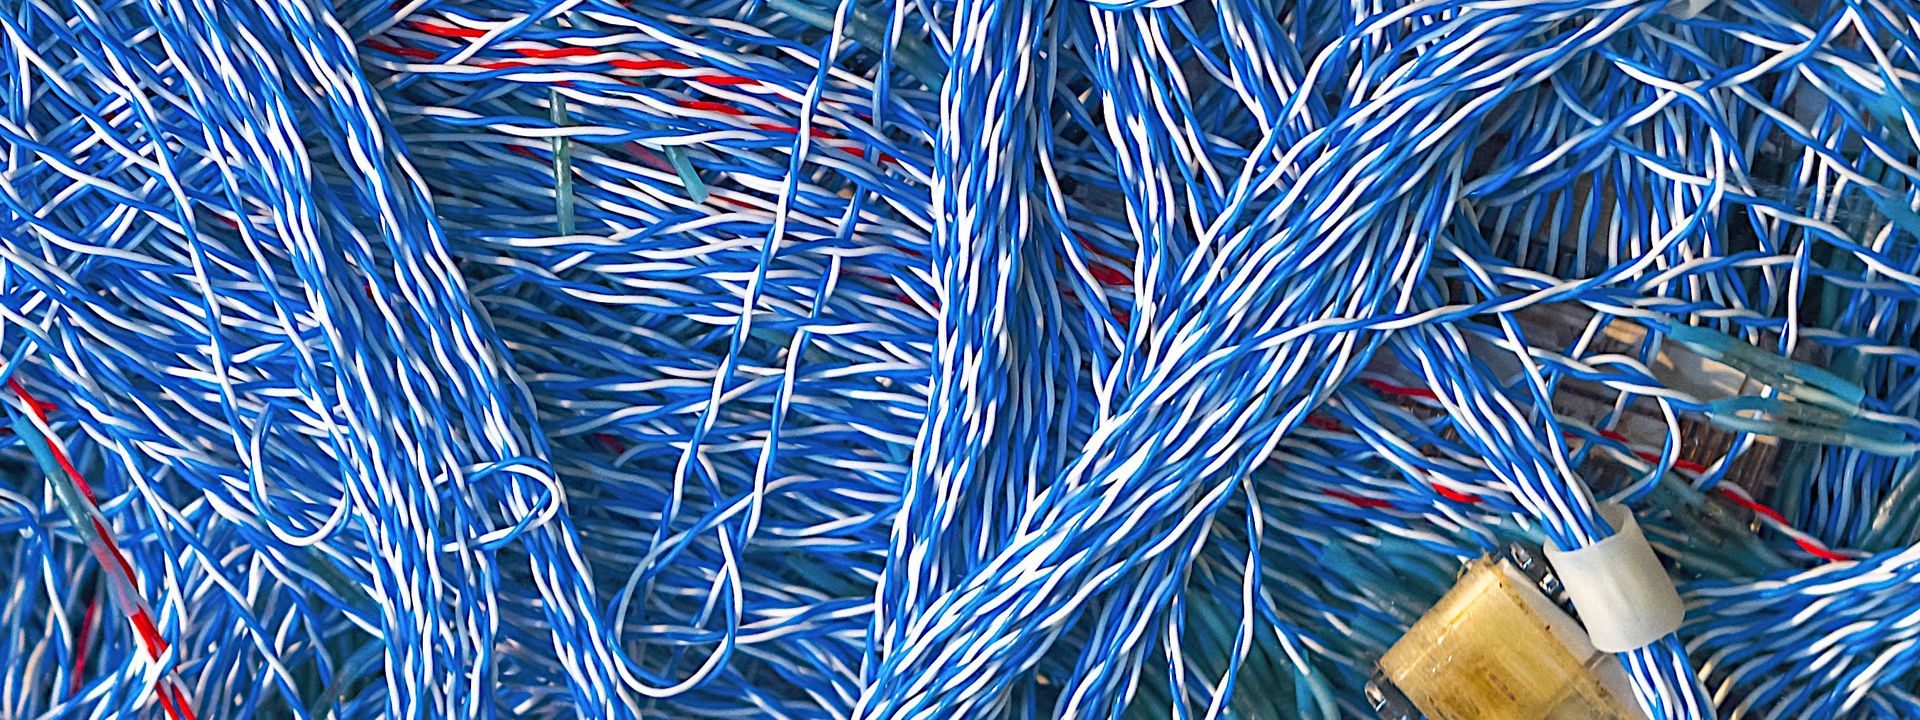 A few red wires can be seen among a maze of blue-white wires and cable harnesses.